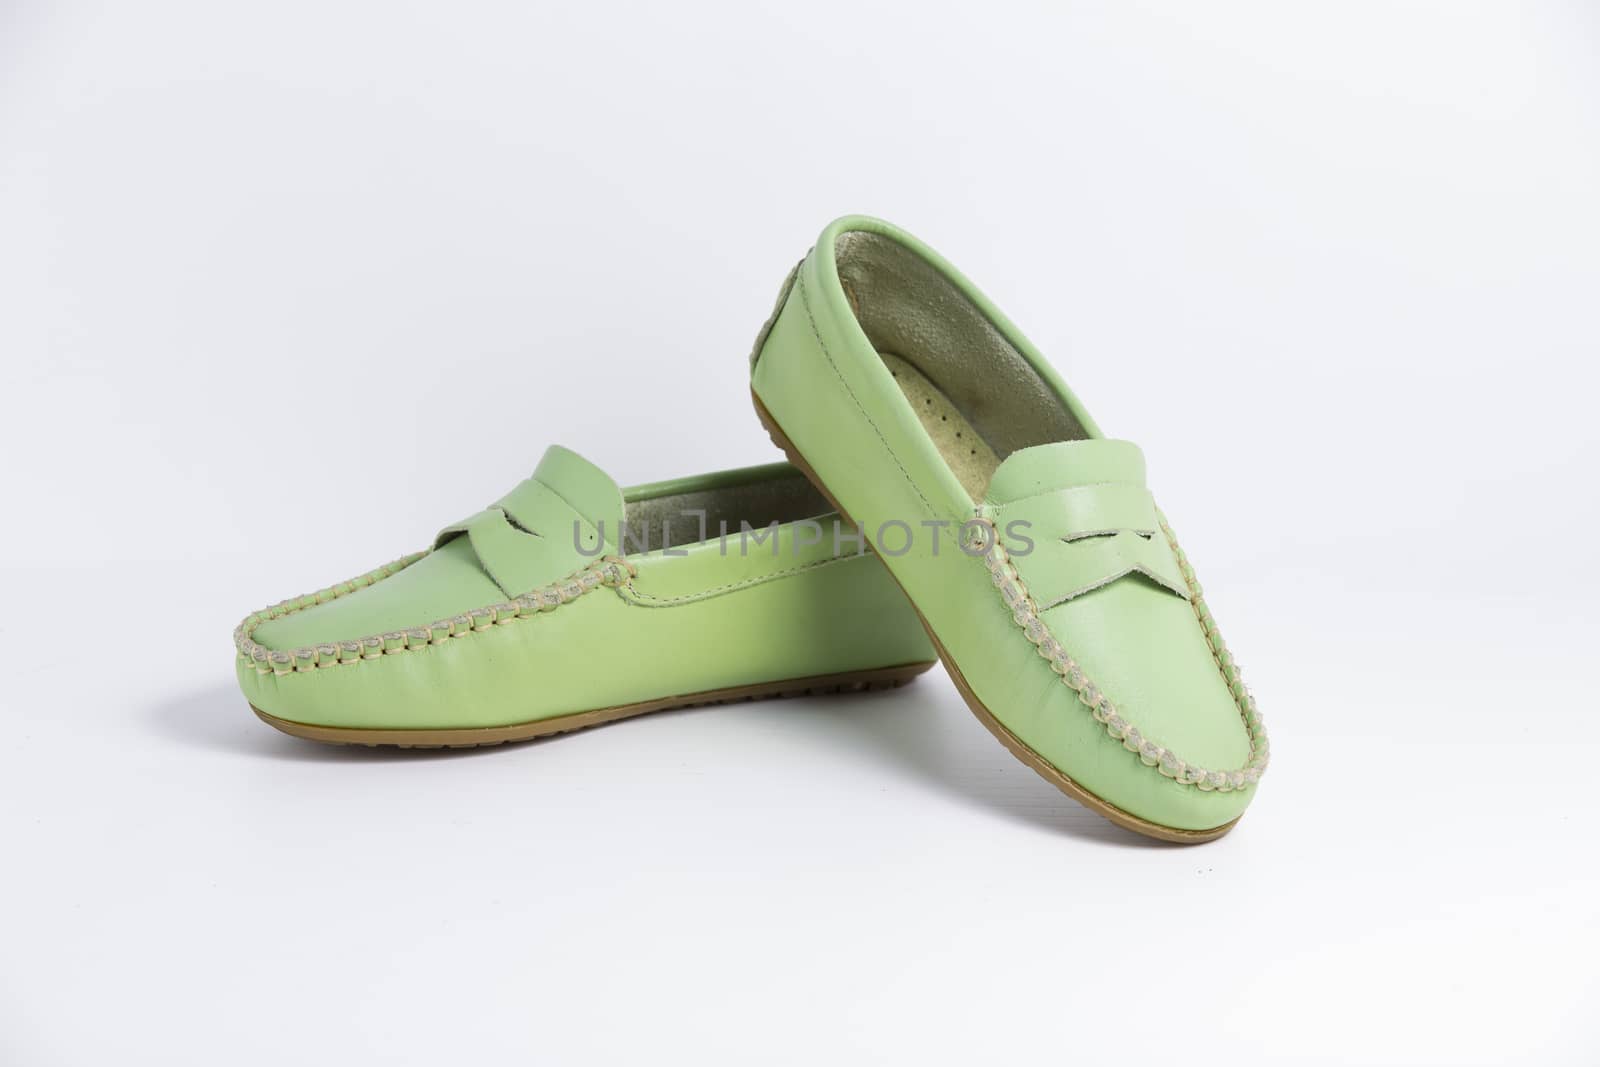 Pair of green leather shoes on white background, isolated product. by GeorgeVieiraSilva